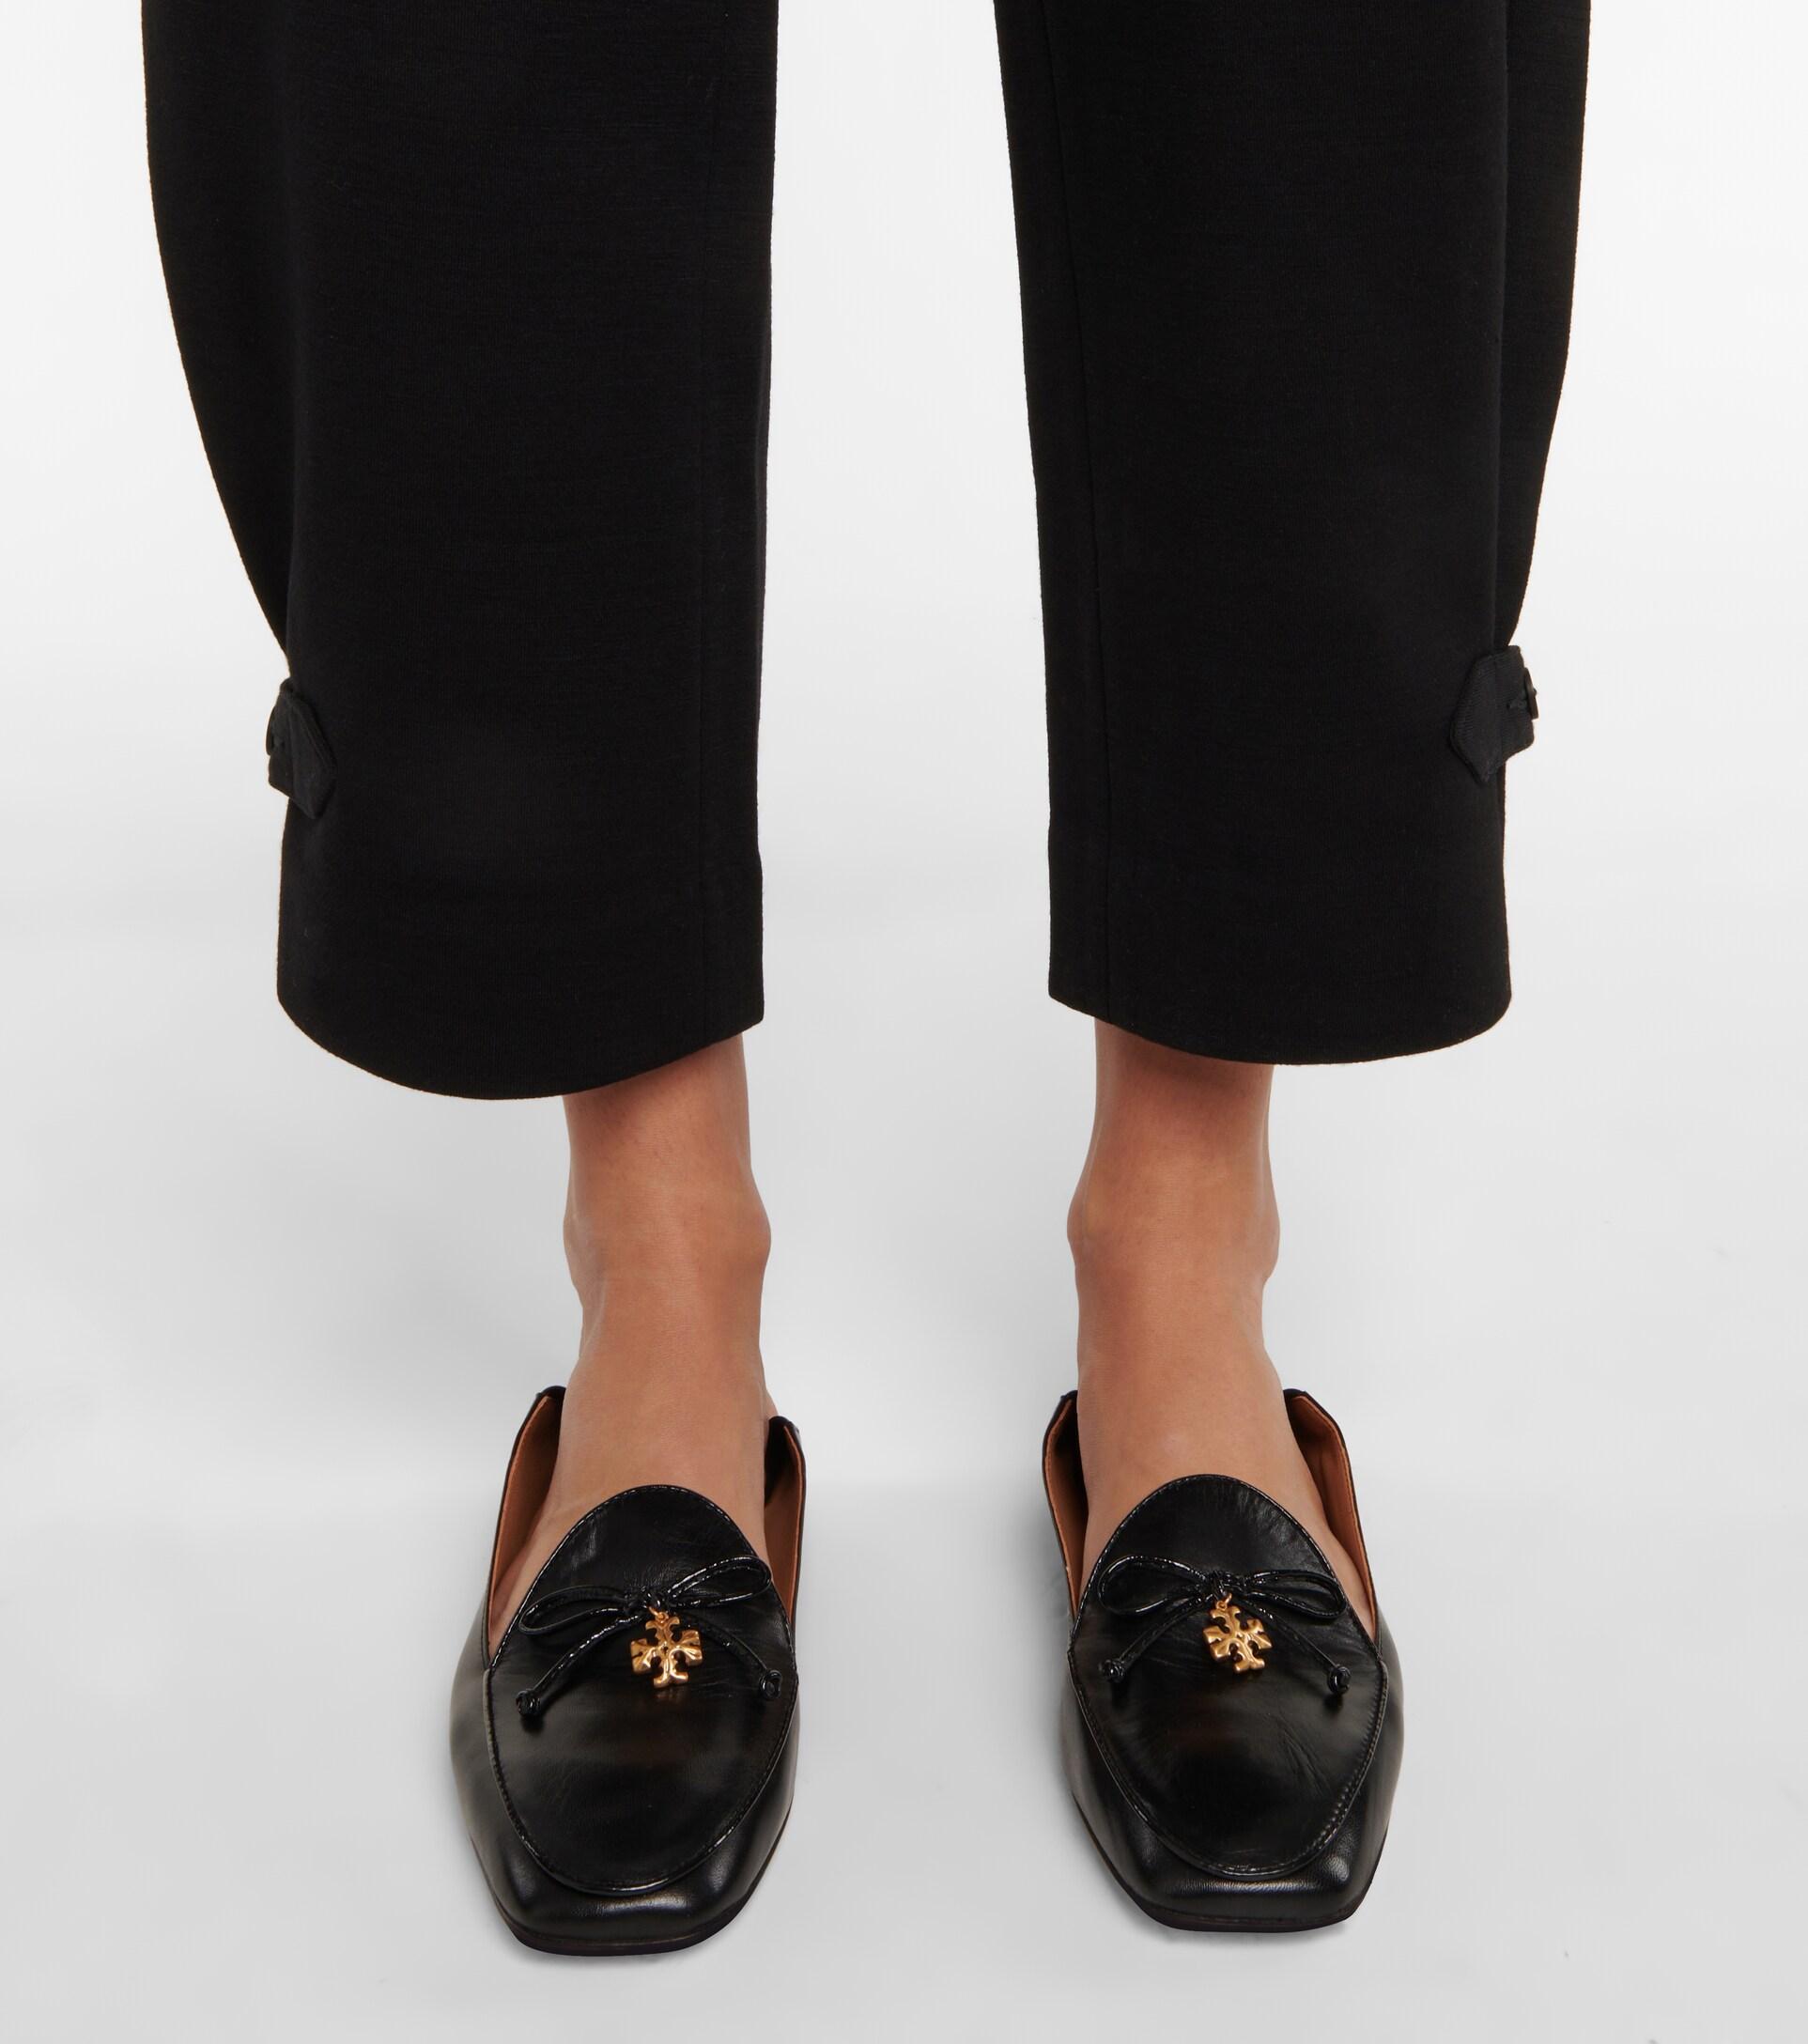 Tory Burch Charm Leather Loafers in Black | Lyst